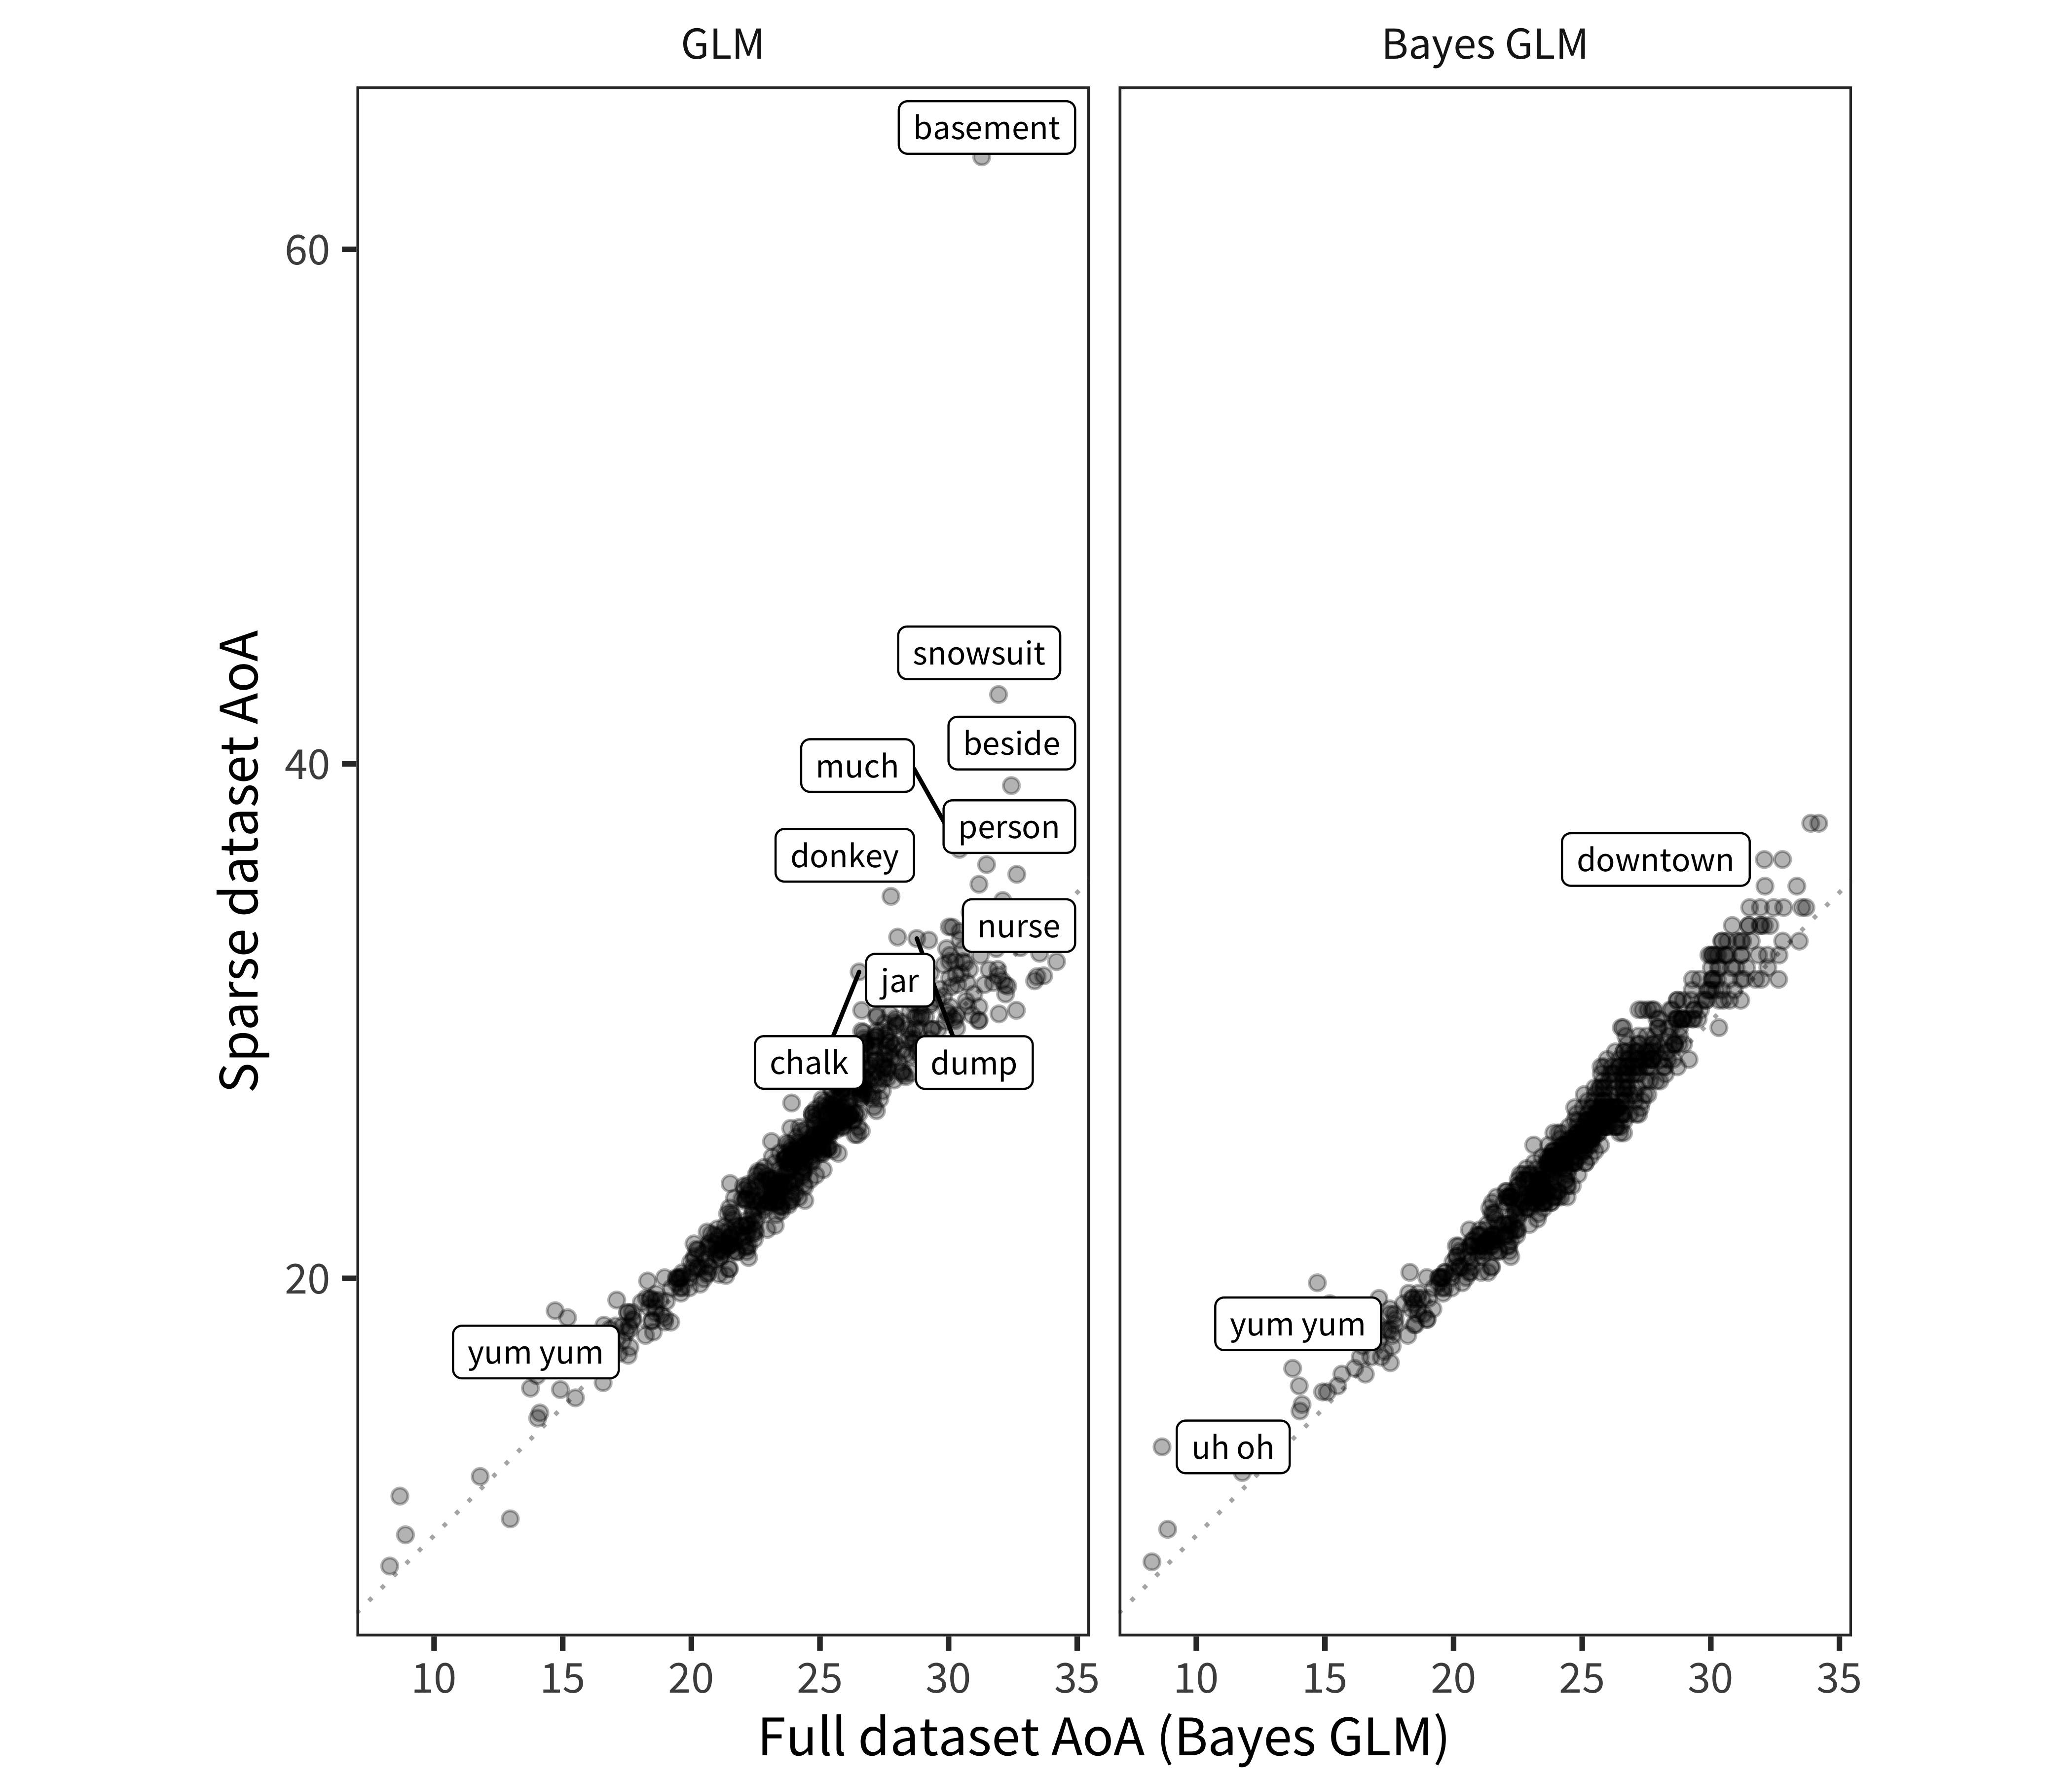 Recovered AoAs from a sparse subsample (100 children), plotted by the Bayesian GLM AoAs from the full dataset. Left panel shows standard GLM, right panel shows Bayesian GLM. Differences of AoA > 4 months between methods are labeled.